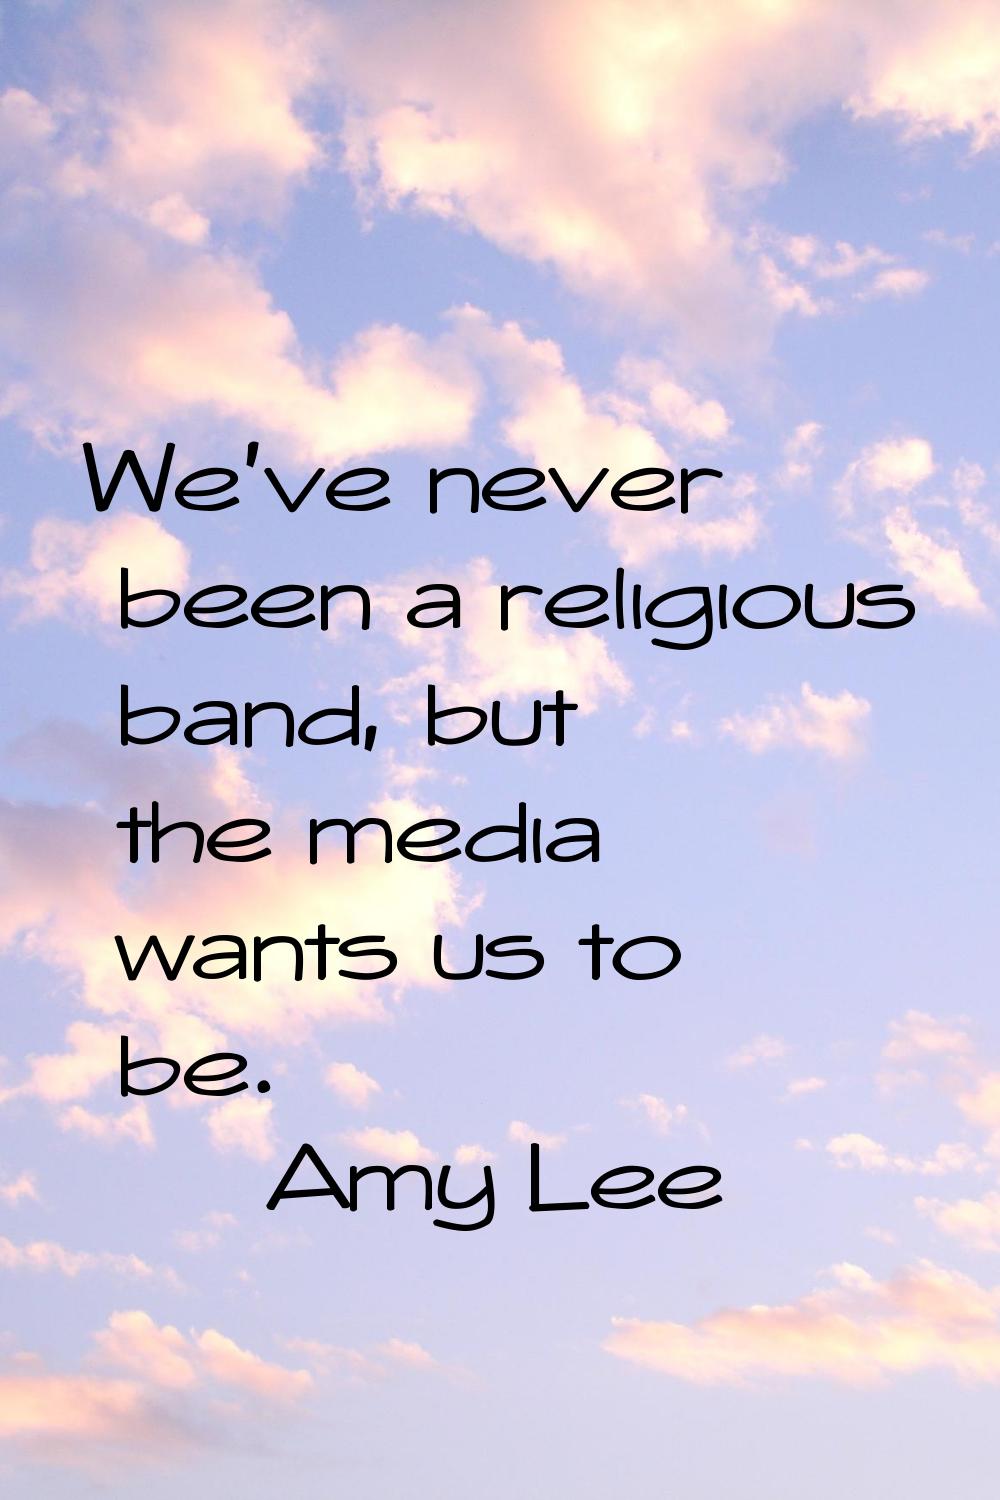 We've never been a religious band, but the media wants us to be.